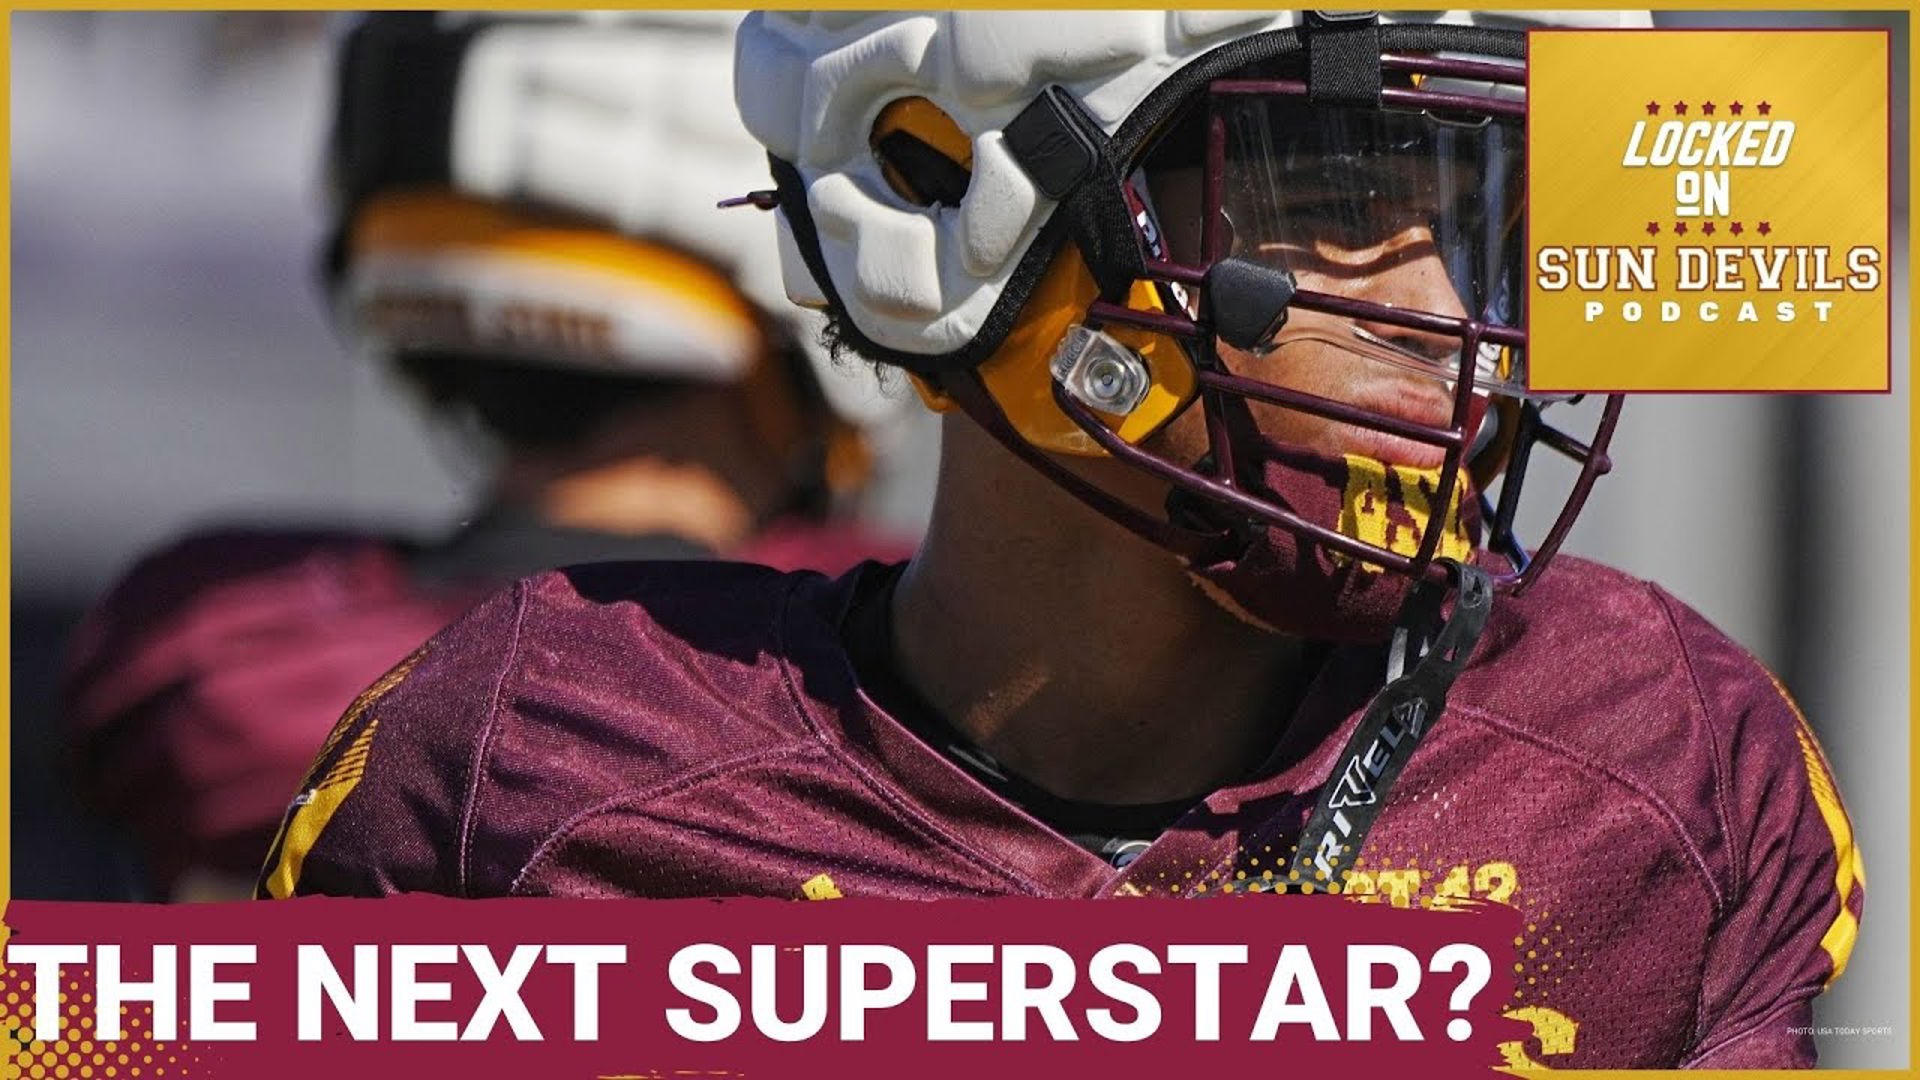 Host Richie Bradshaw dives into these standouts on the offensive side of the football for Arizona State Sun Devils football on this edition of the podcast.